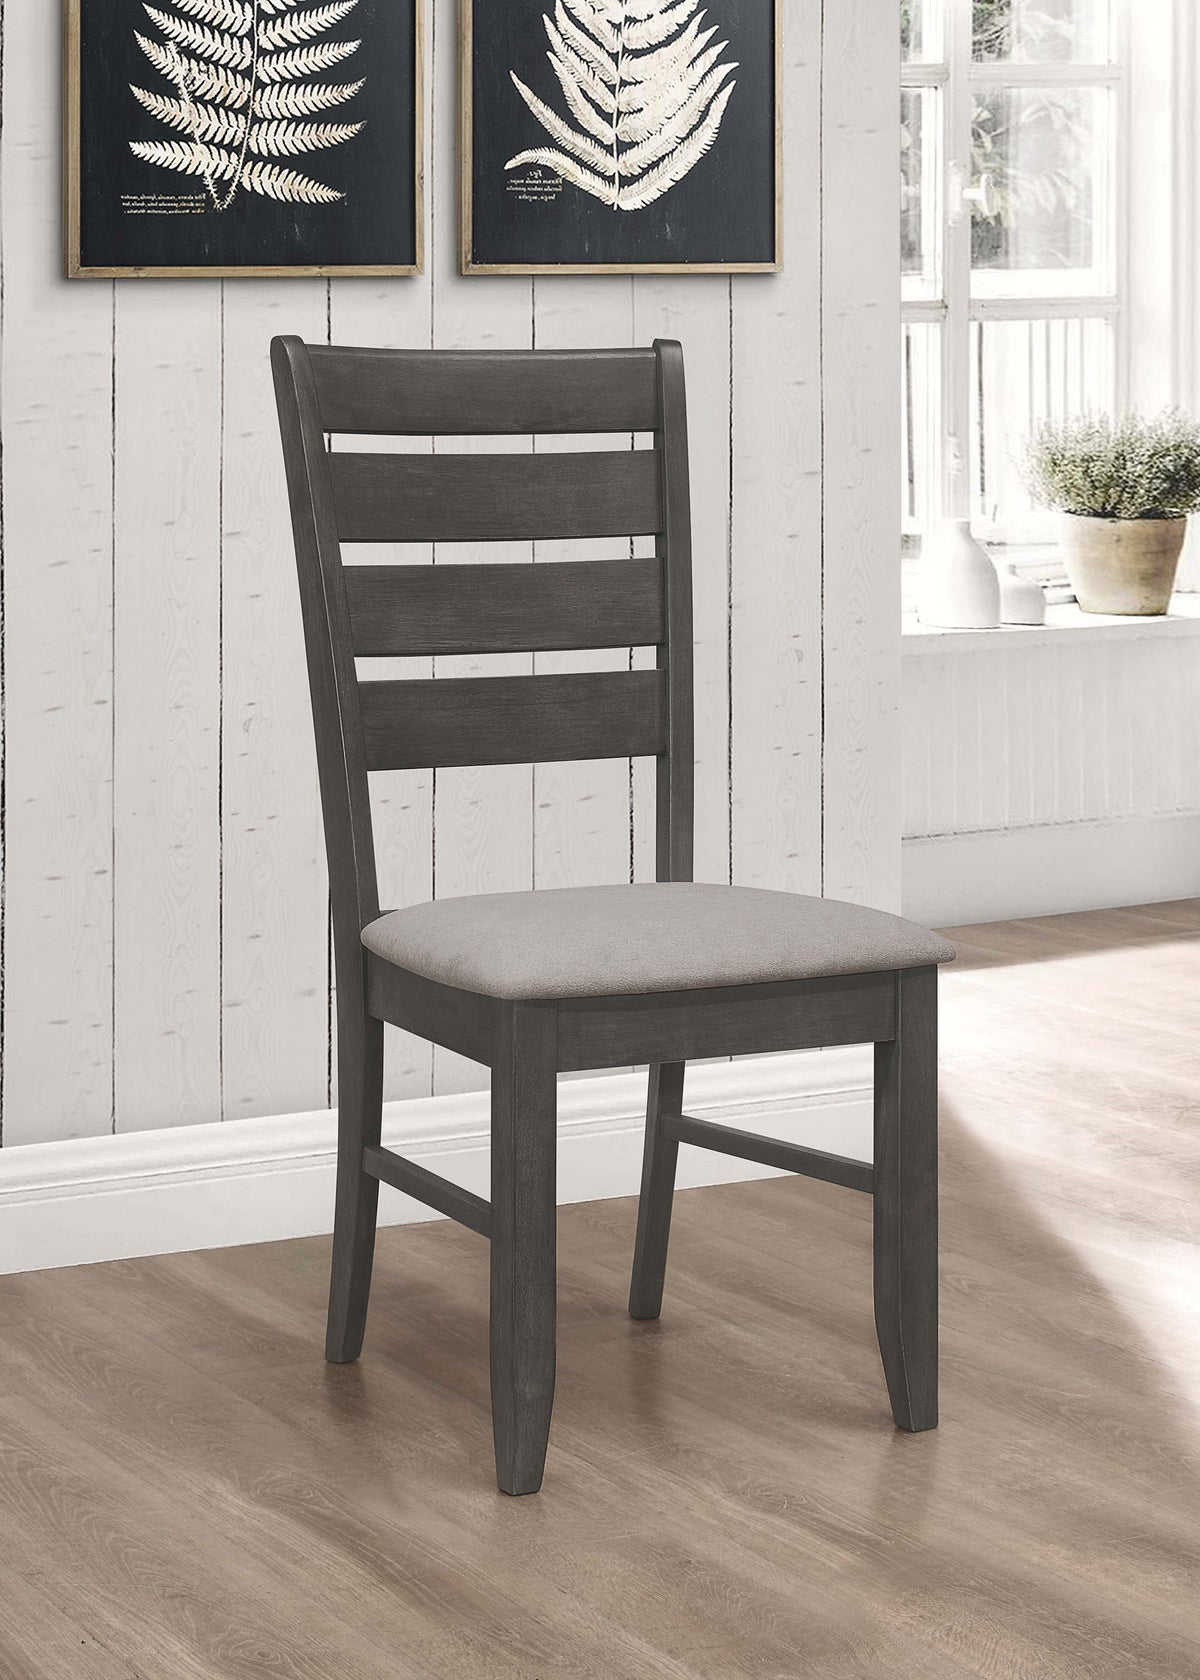 Dalila Ladder Back Side Chair (Set of 2) Grey and Dark Grey Dalila Ladder Back Side Chair (Set of 2) Grey and Dark Grey Half Price Furniture